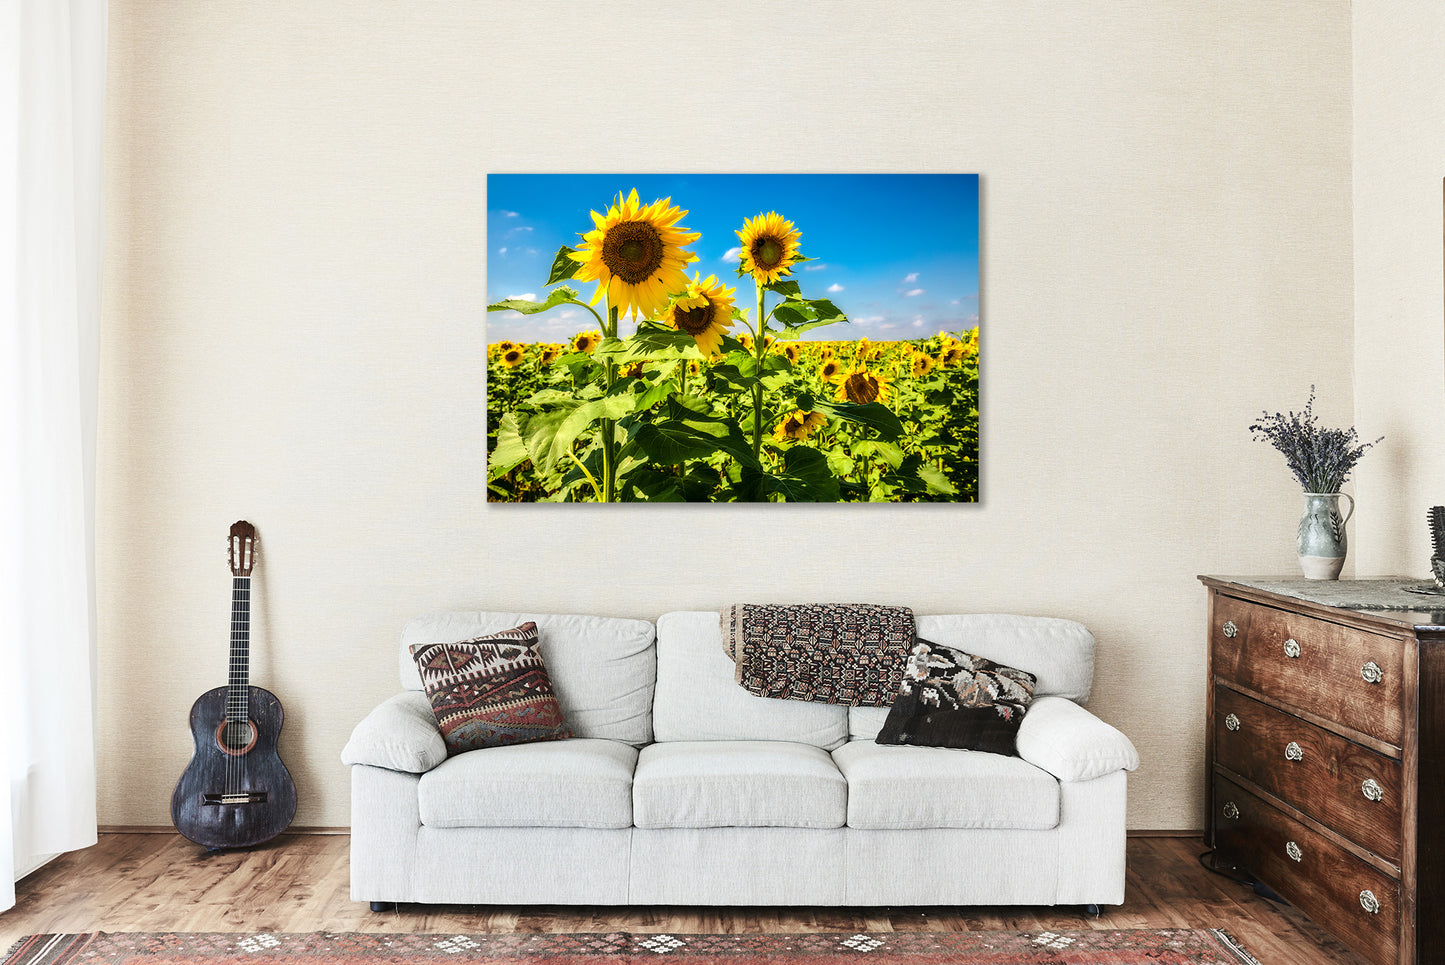 Country Metal Print (Ready to Hang) Photo on Aluminum of Sunflowers Standing Tall in Sunflower Field in Kansas Farm Wall Art Botanical Decor